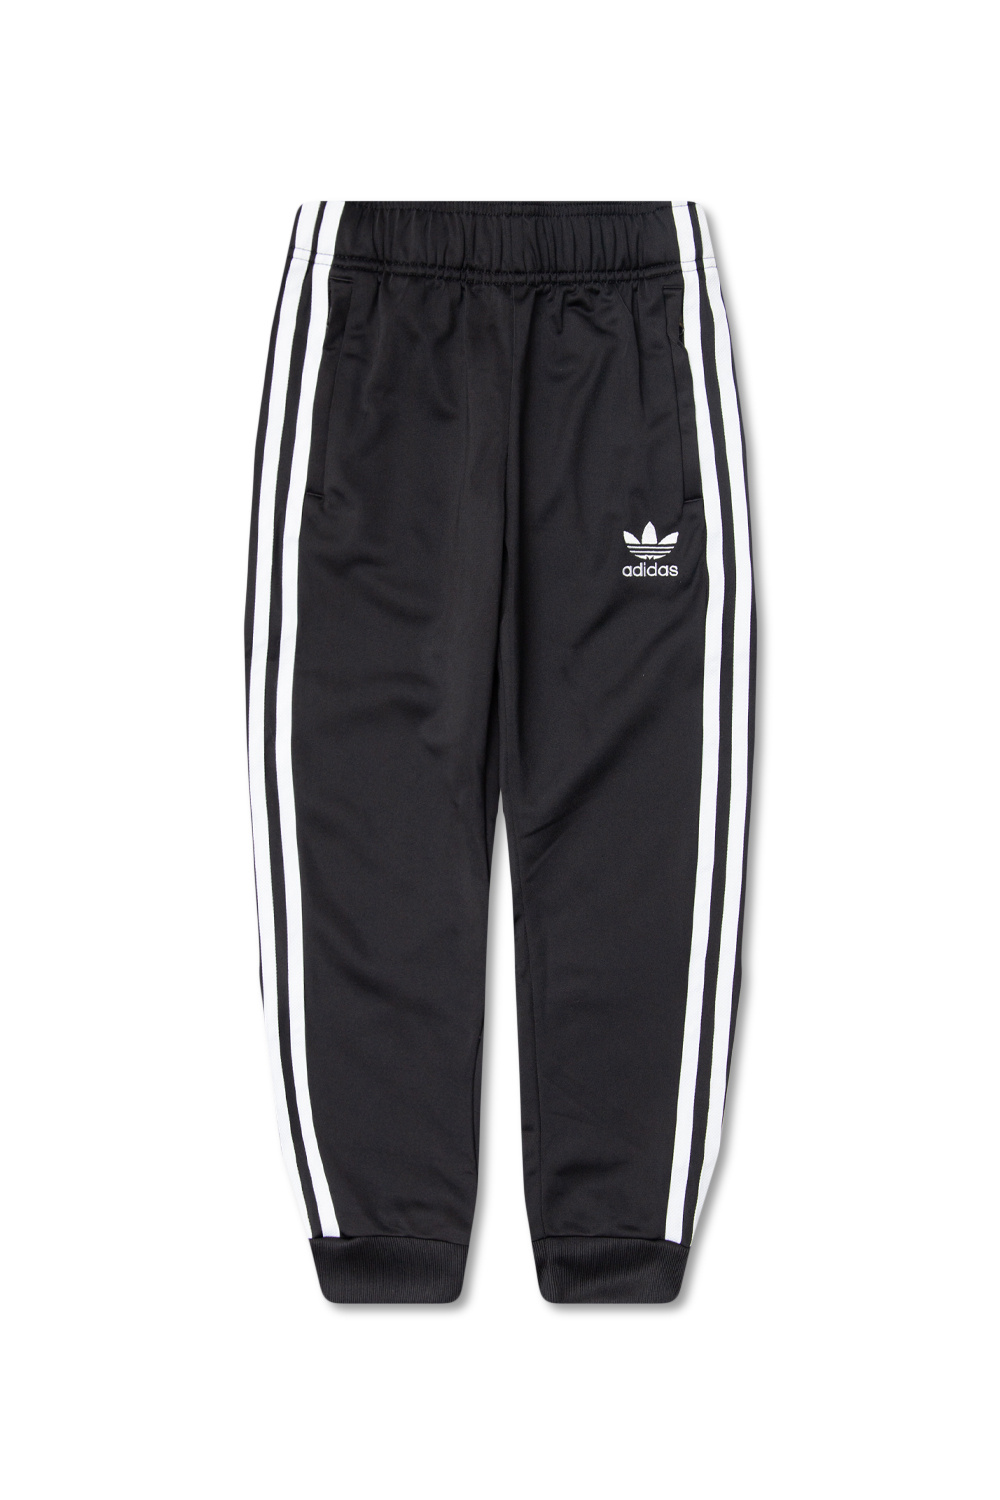 ADIDAS Trouser Pants Assorted 50OFF Free Delivery Shop Now Online